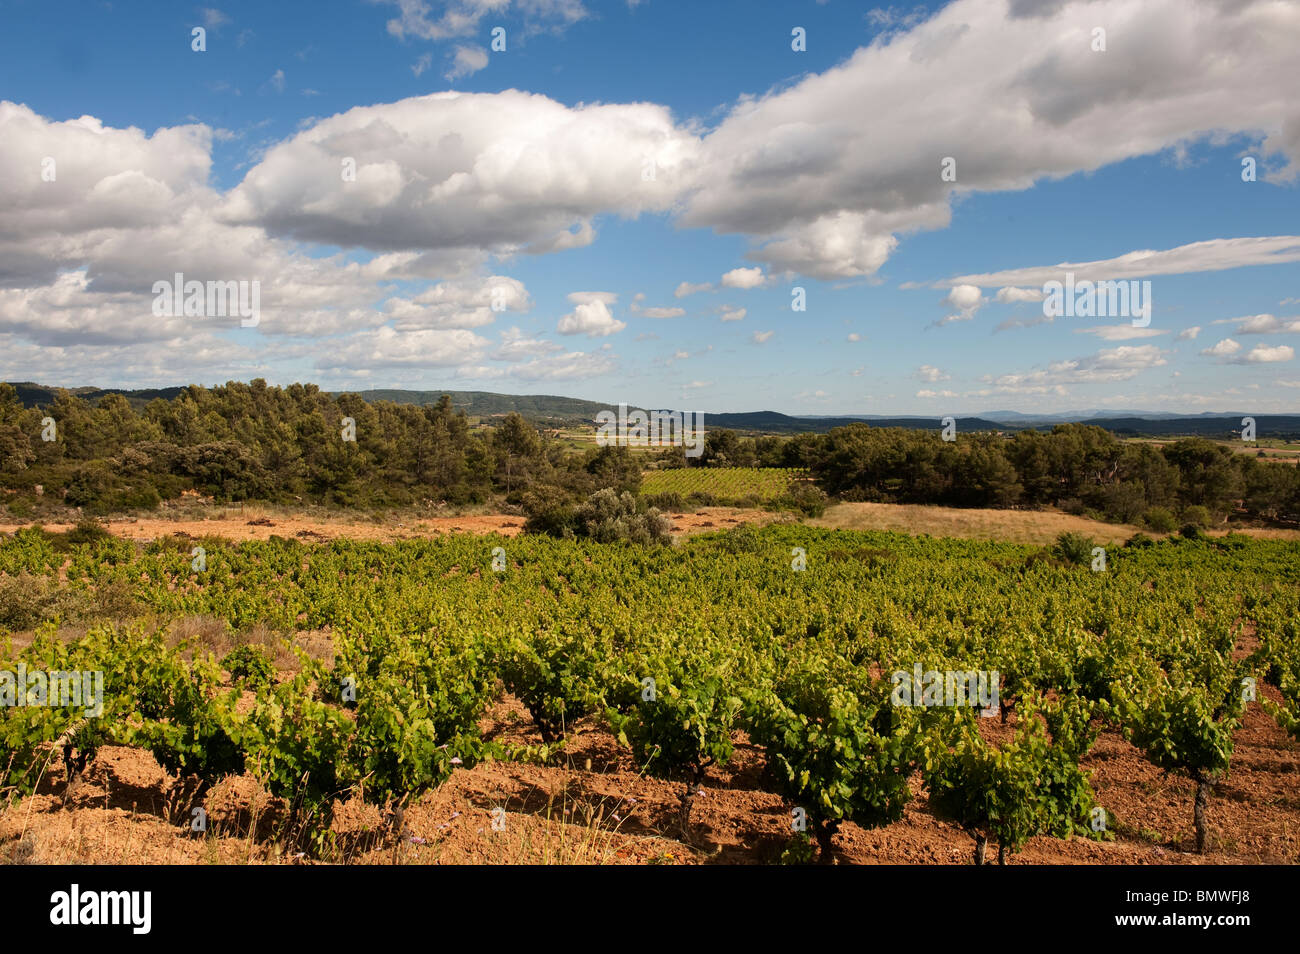 Vineyards in the South of France Stock Photo